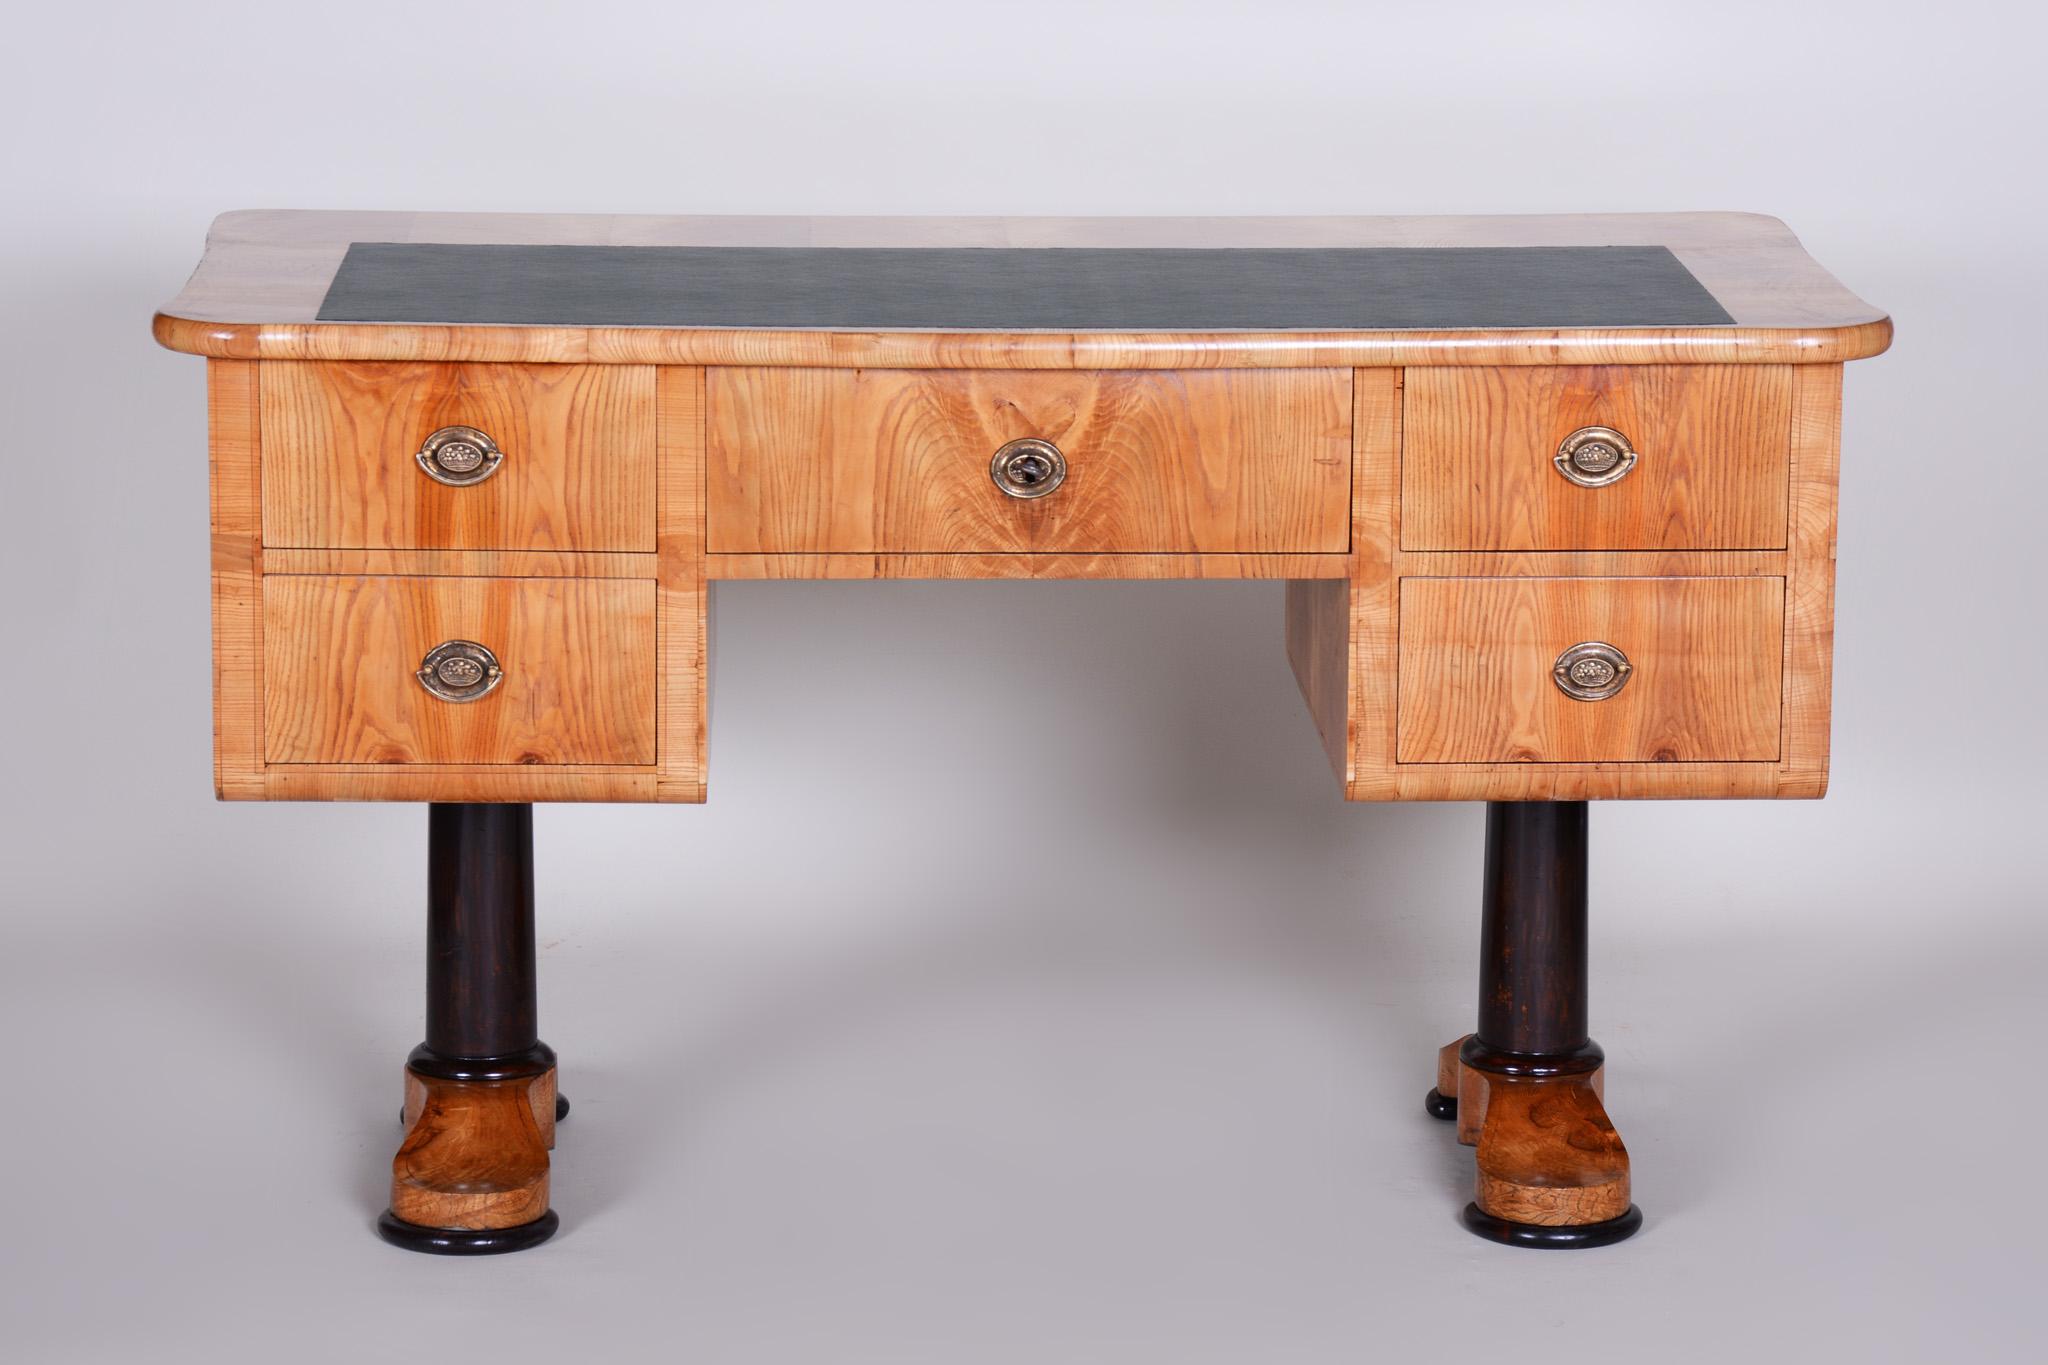 Shipping to any US port only for $290 USD

Biedermeier writing desk
Completely restored.
Shellac polish.
Material: Ash veneer, lacquer
Period: 1830-1839
Unique pieces.

Height from floor to drawer is 61 cm (24 in)





    